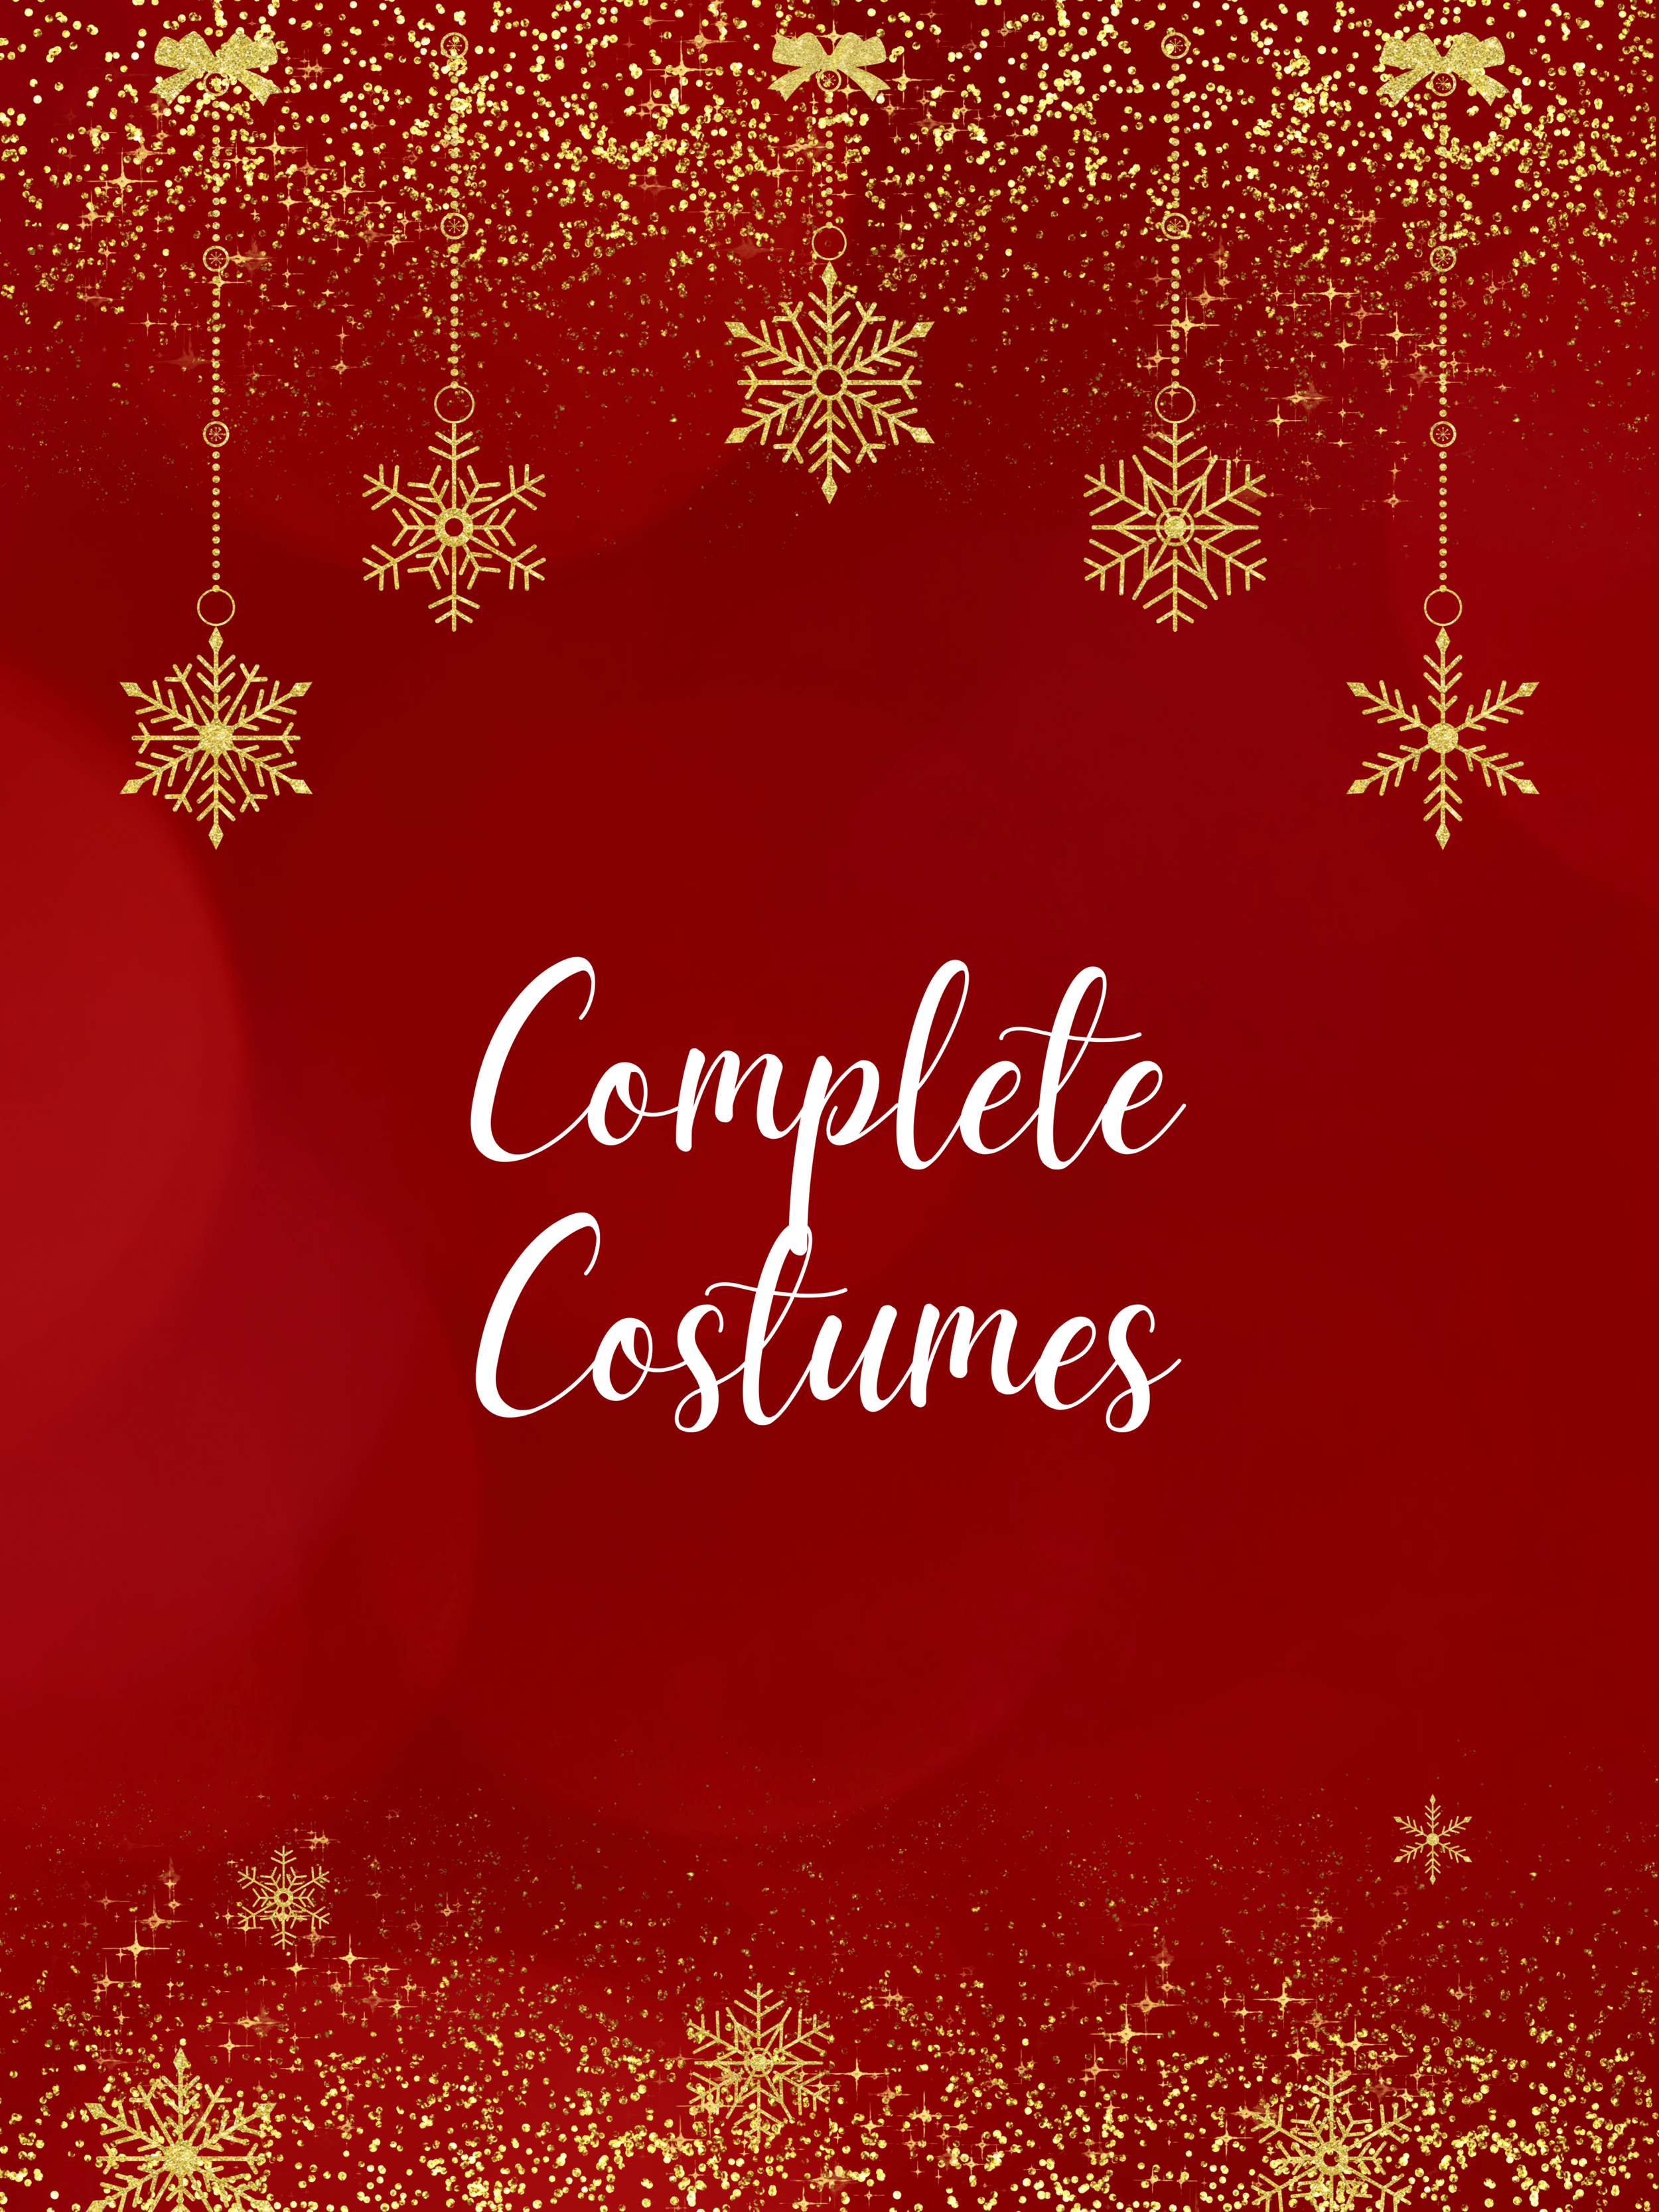 Silver Leaf Costumes 2021 Holiday Gift Guide - Reduced File Size-12.png